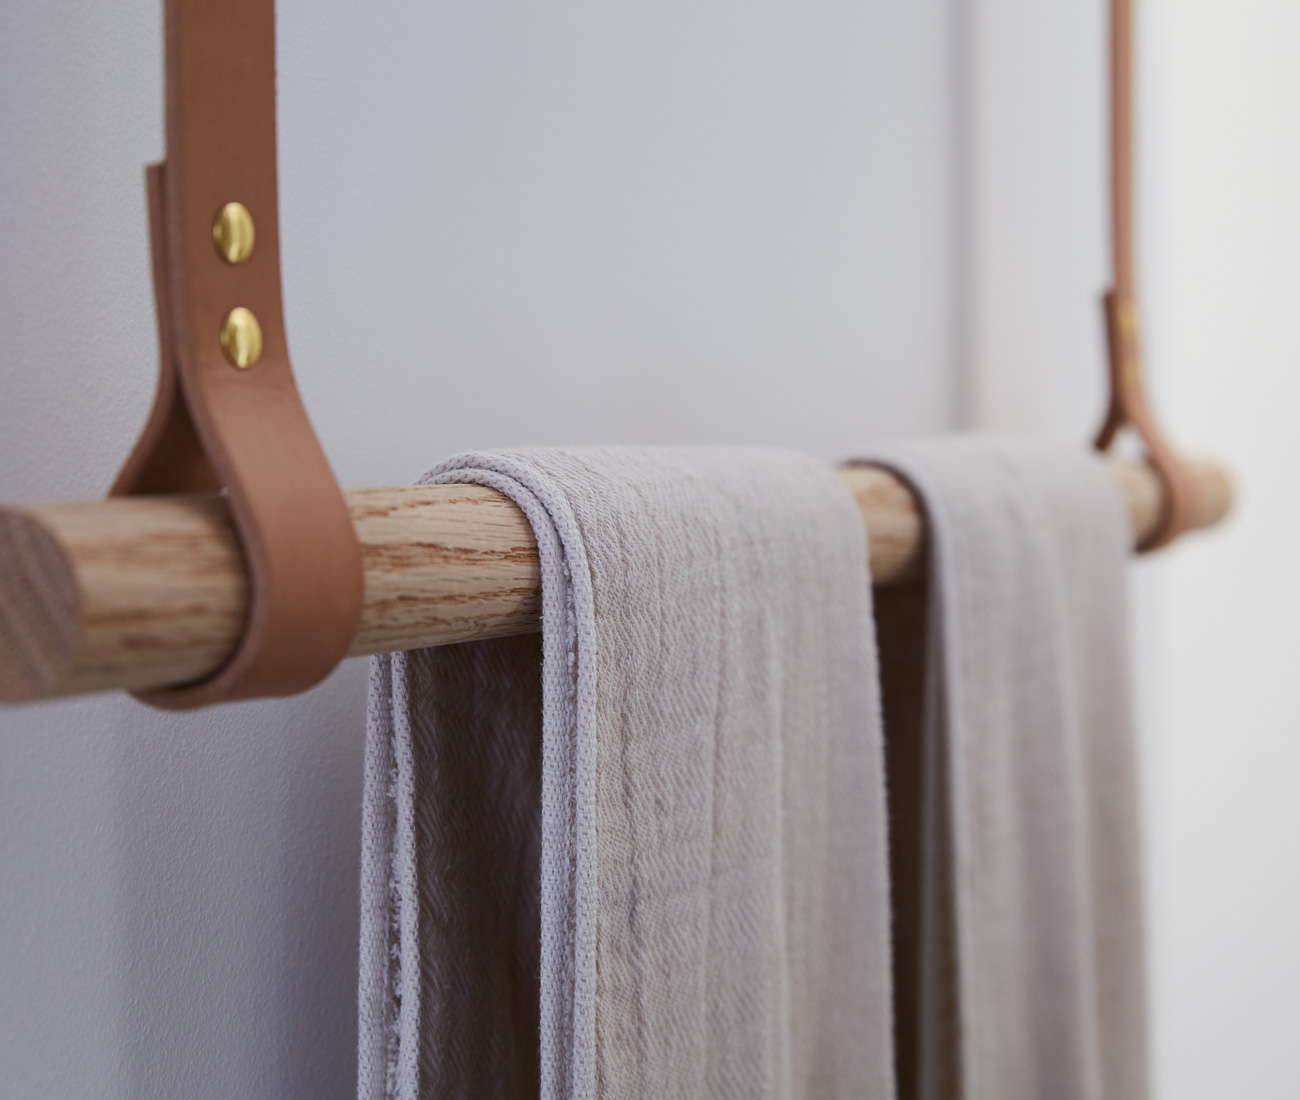 Another ingenious custom flourish: an oak dowel towel rack, hung on ceiling-mounted, tanned leather straps. Photo by Naomi Finlay.